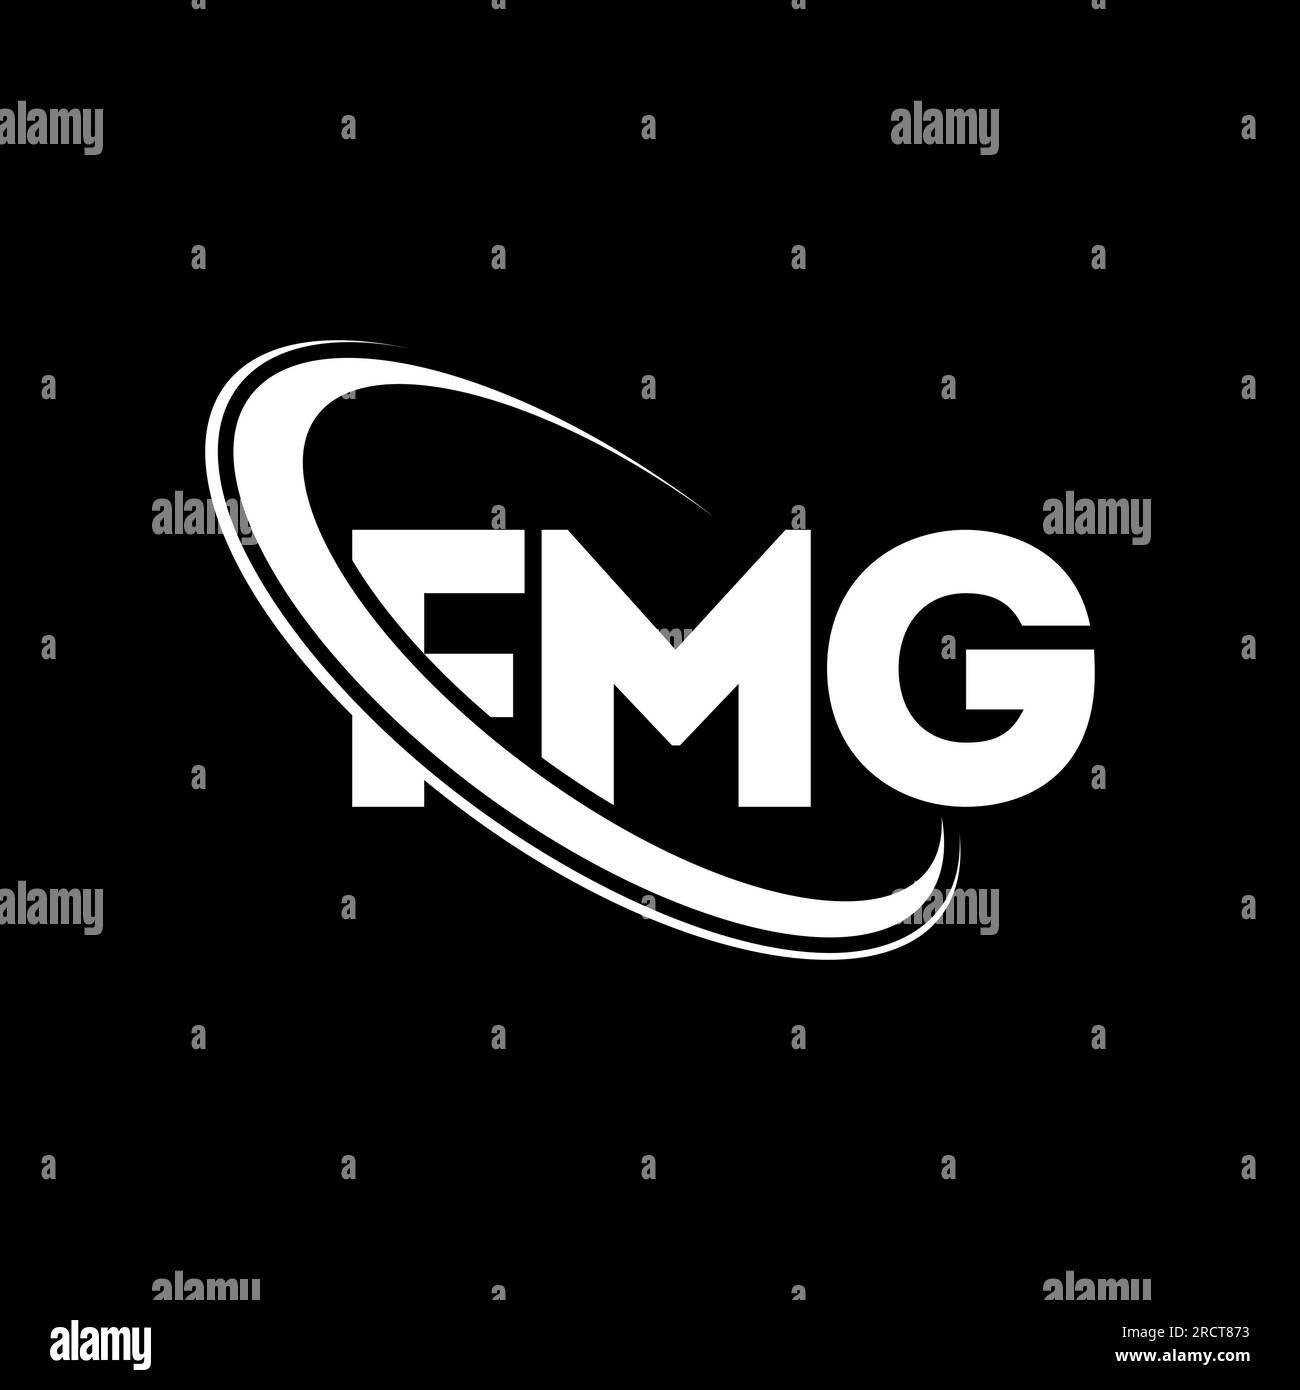 Fmg Stock Vector Images - Alamy